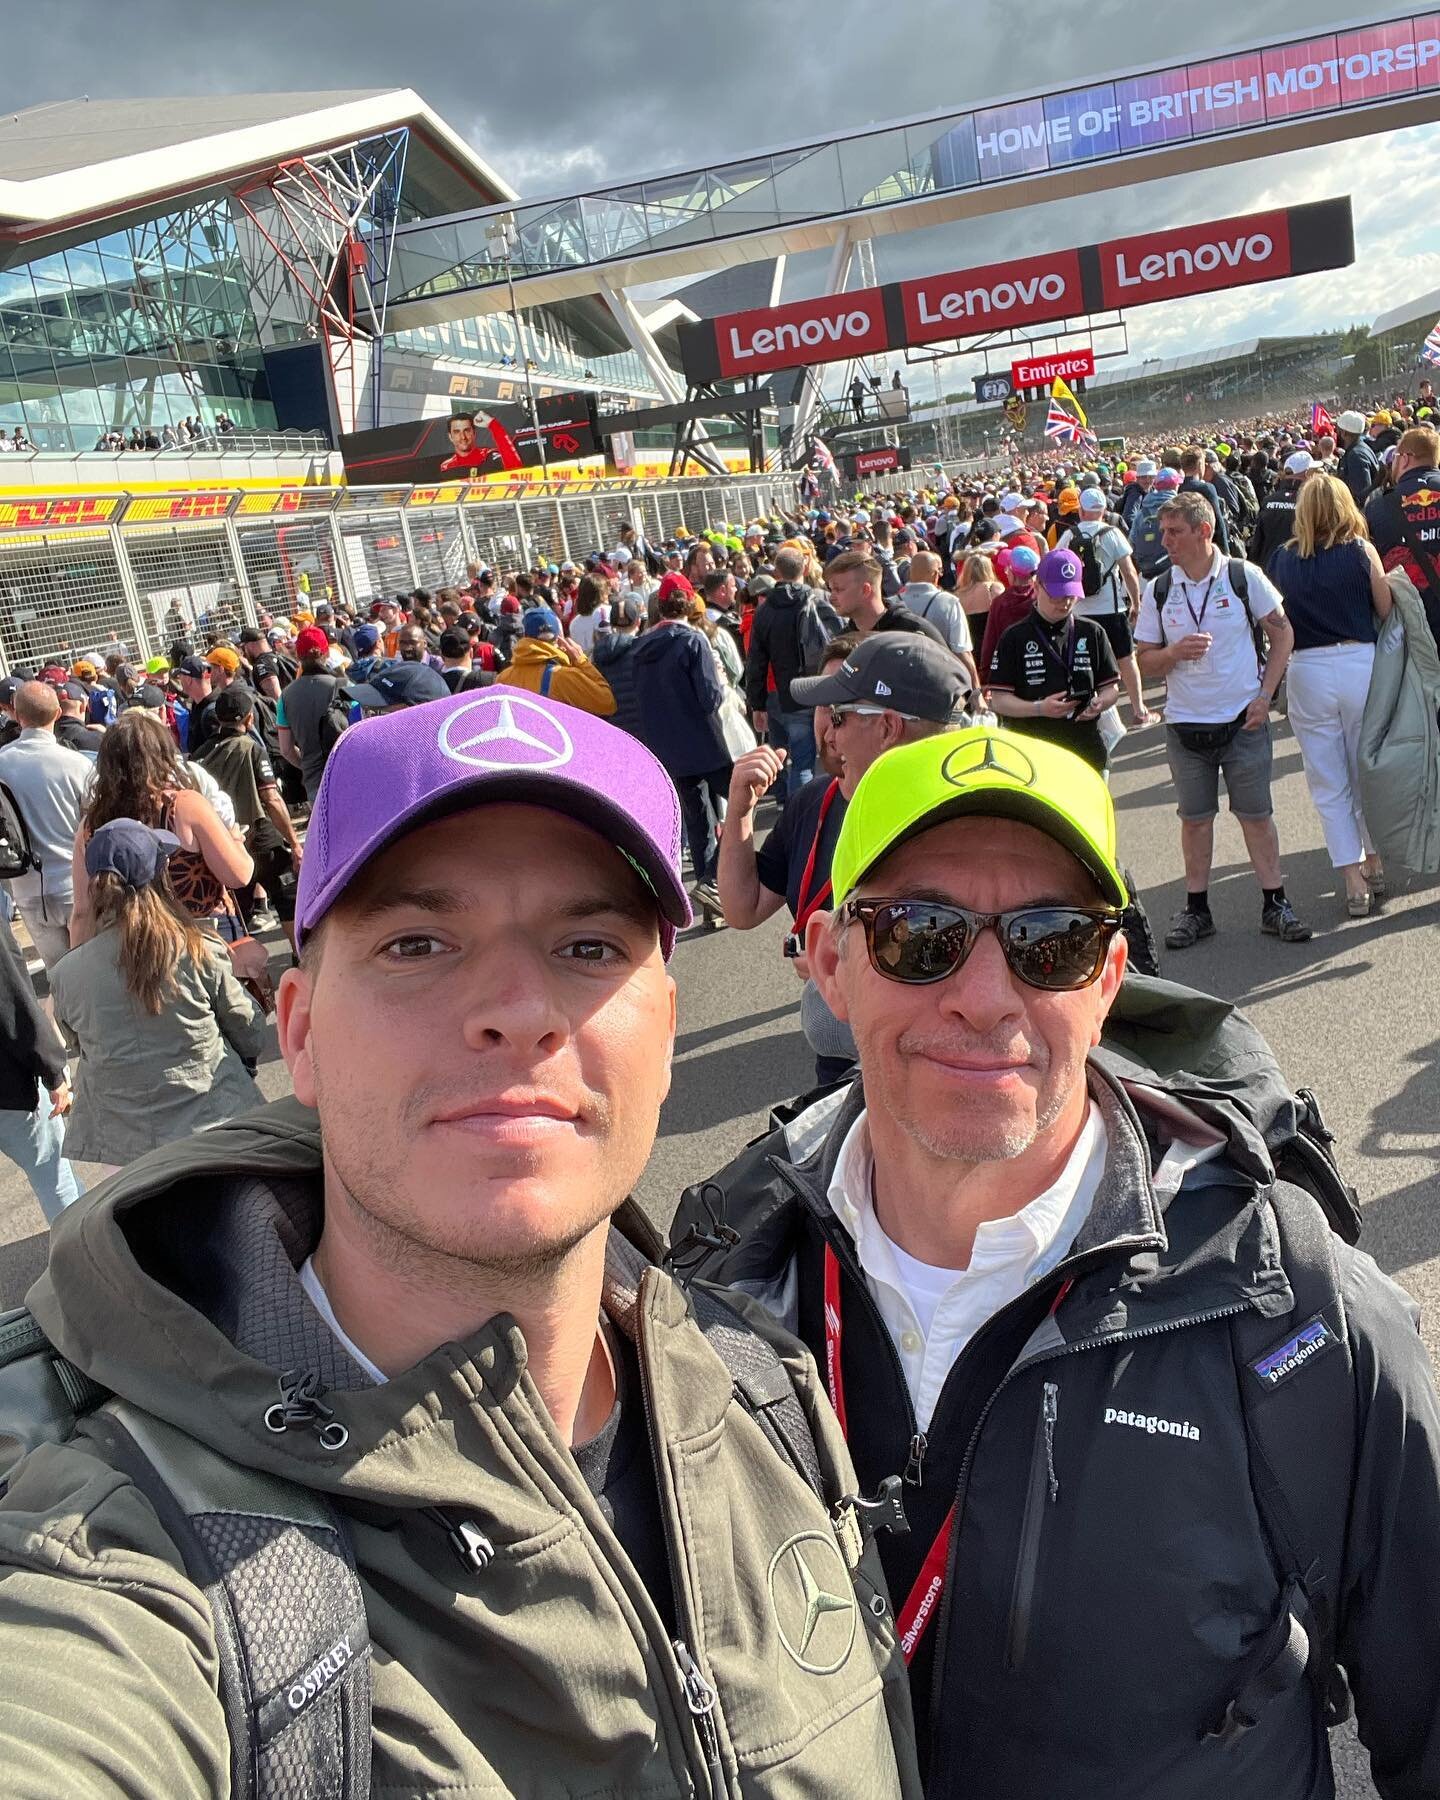 My dad and I have been following @f1 religiously since 2007 when we heard that a young, black Brit had stormed into the sport and put seasoned world champions on notice. 15 years later and we finally made it across the pond to witness the legend, Sir